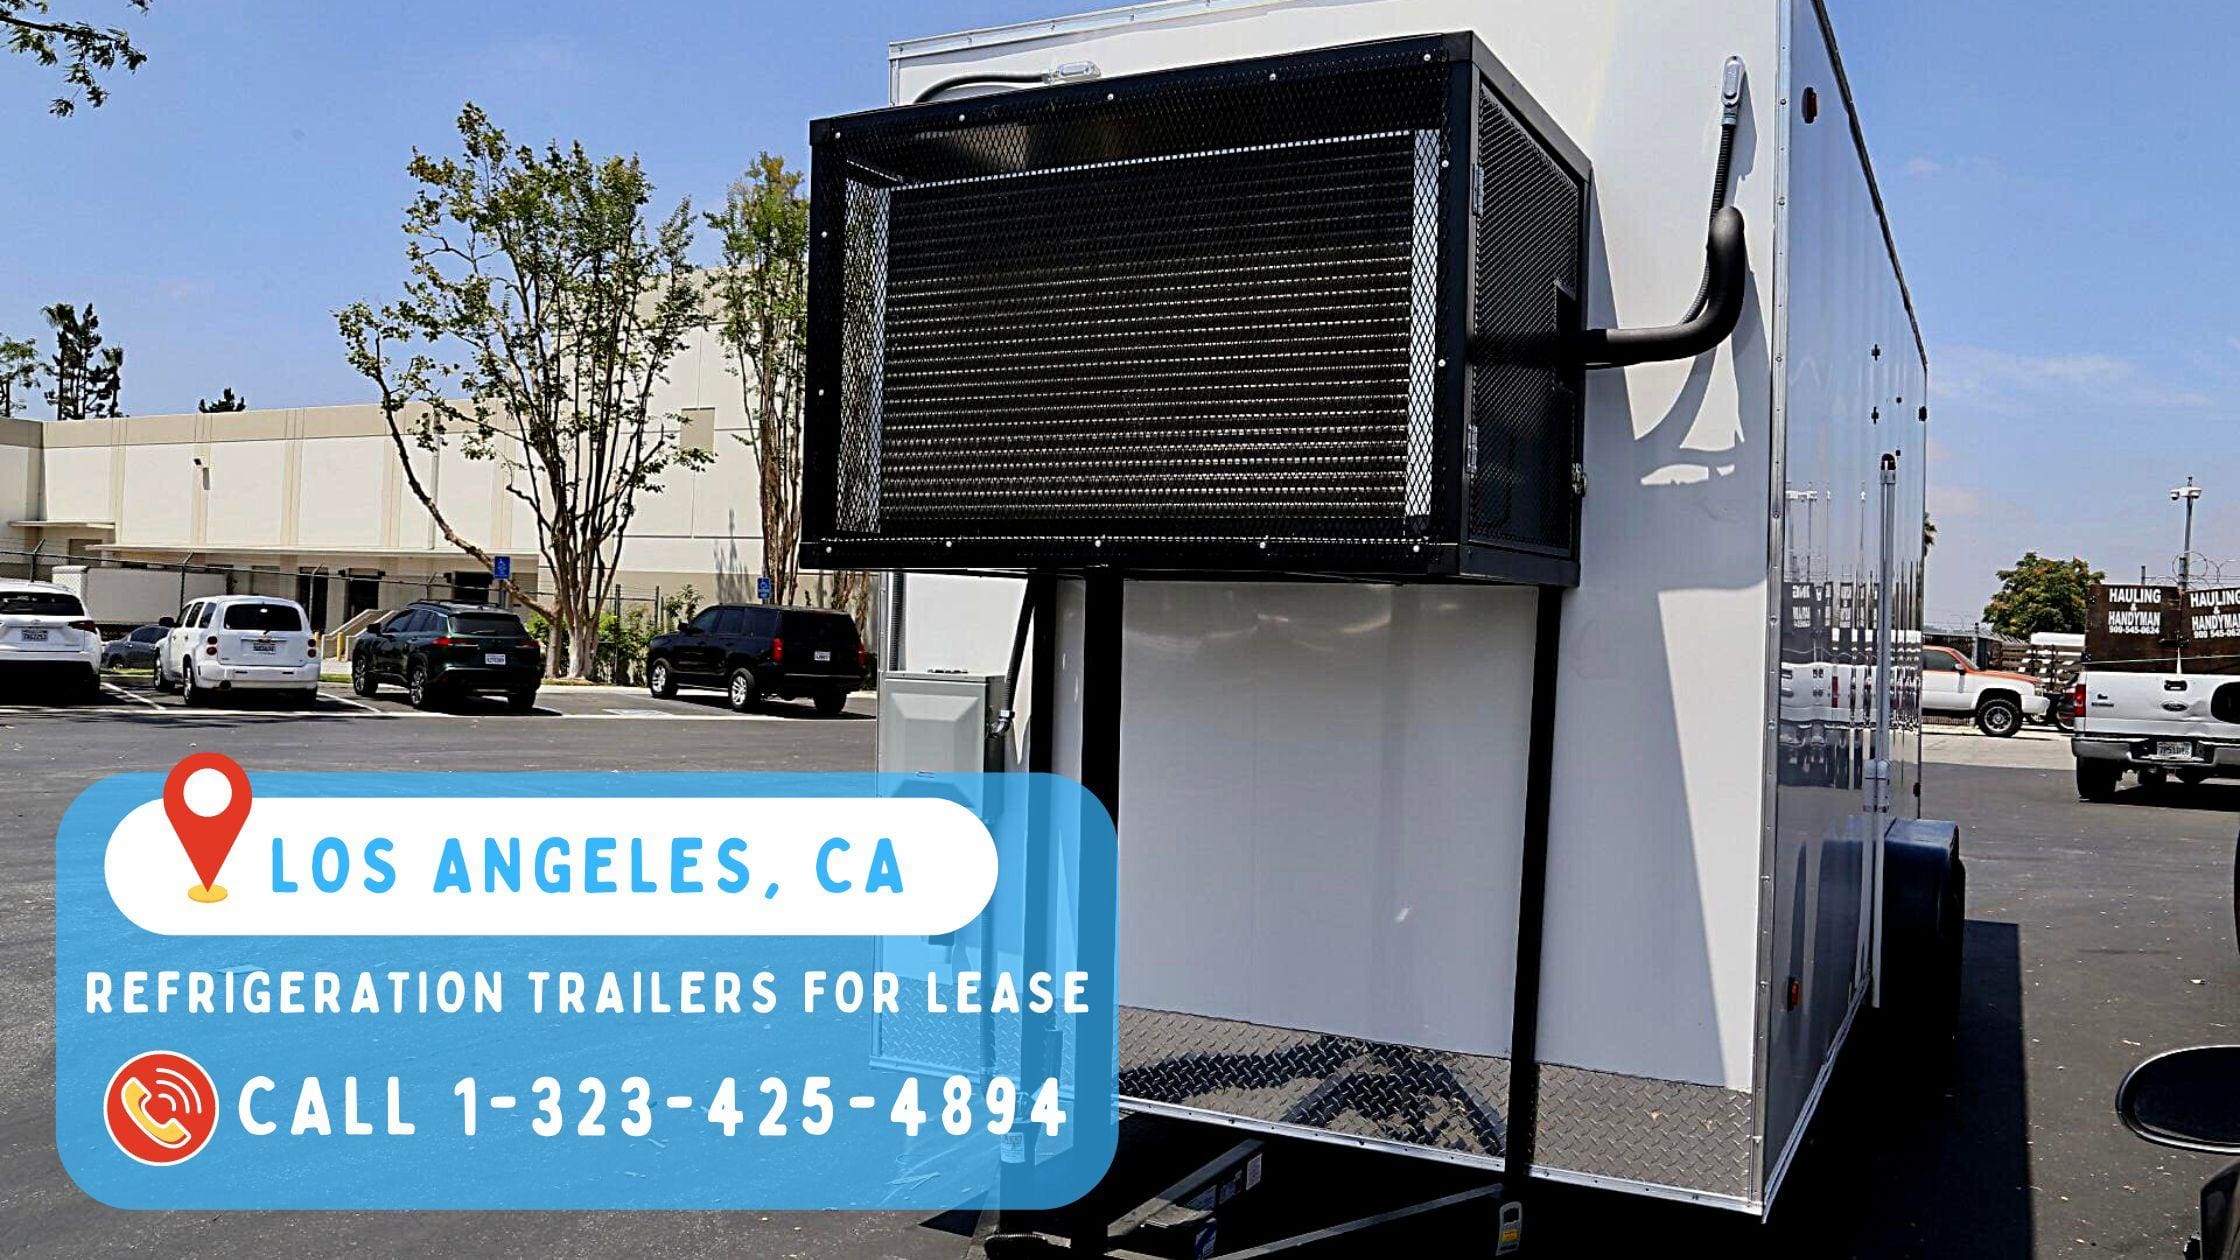 Refrigeration Trailers for Lease in Los Angeles